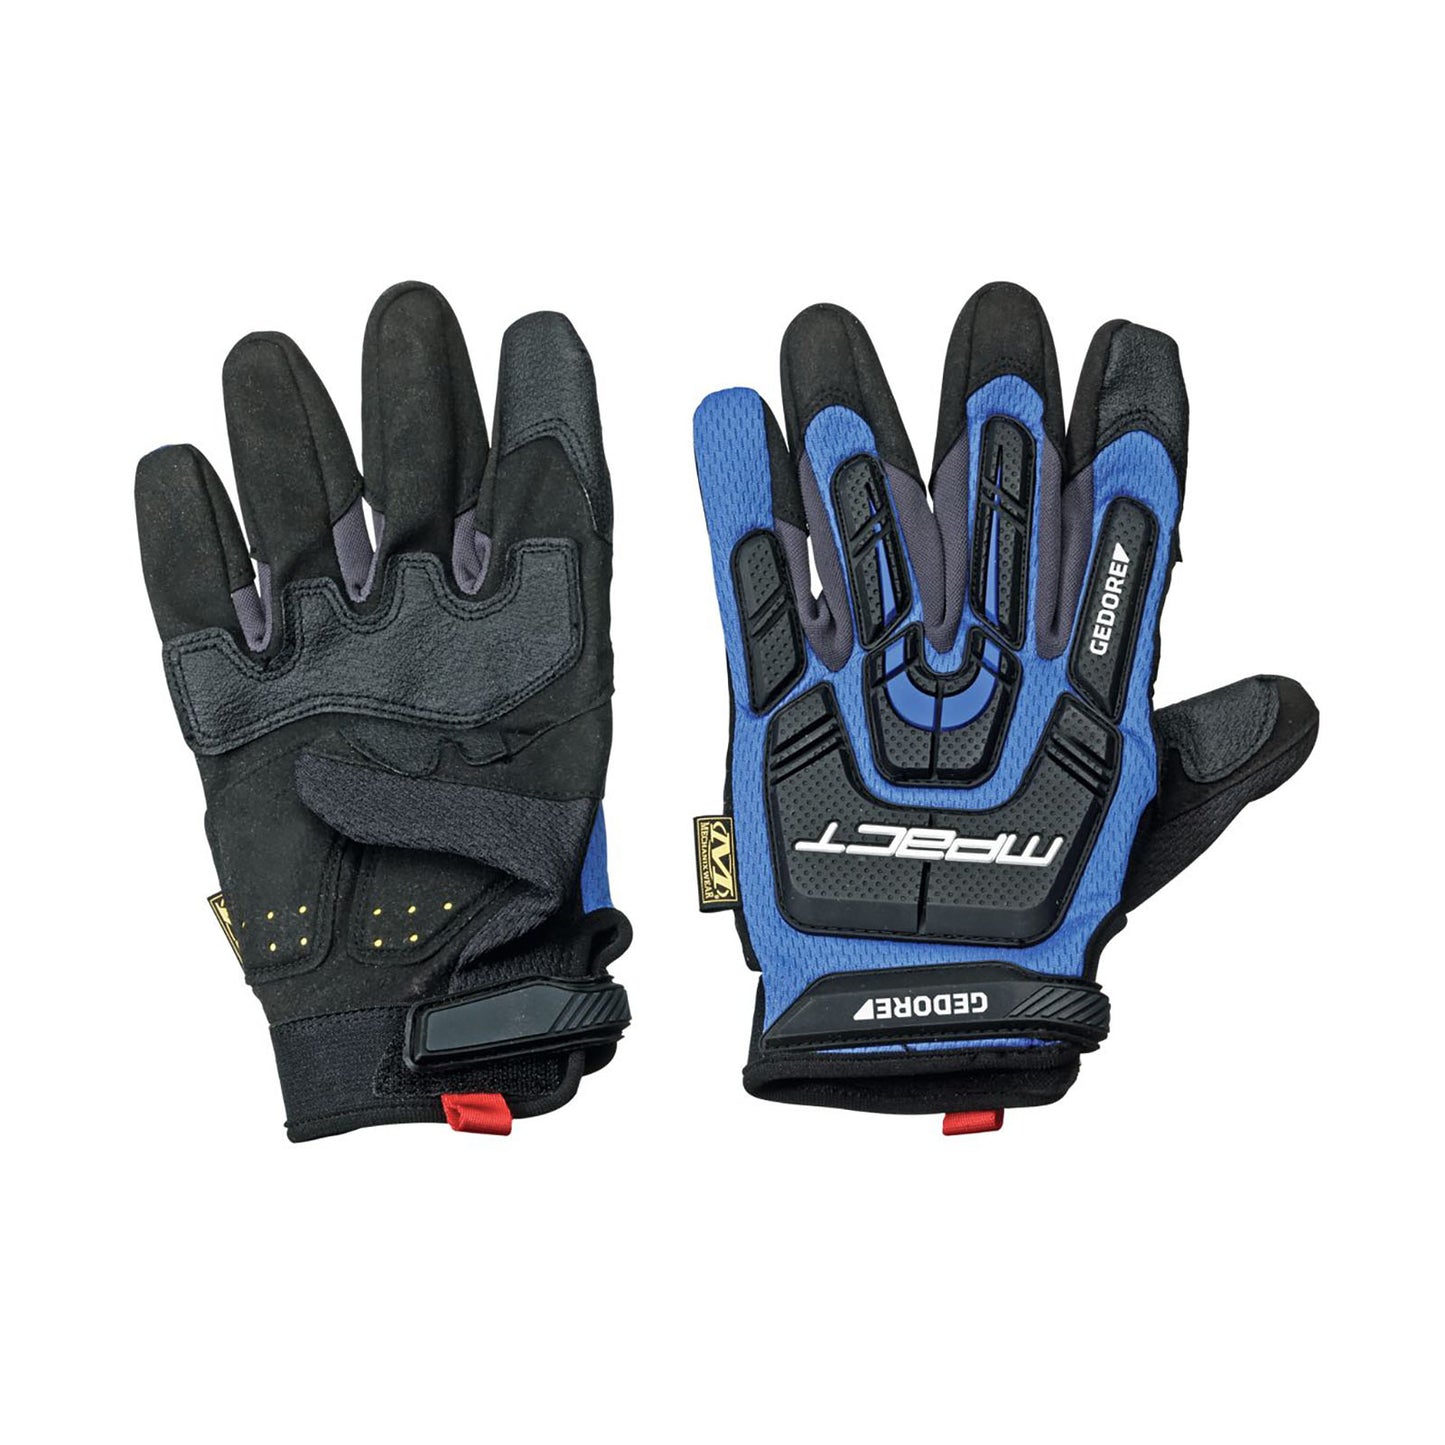 GEDORE 922 10 - M-PACT Gloves Size L/10 (1938754)